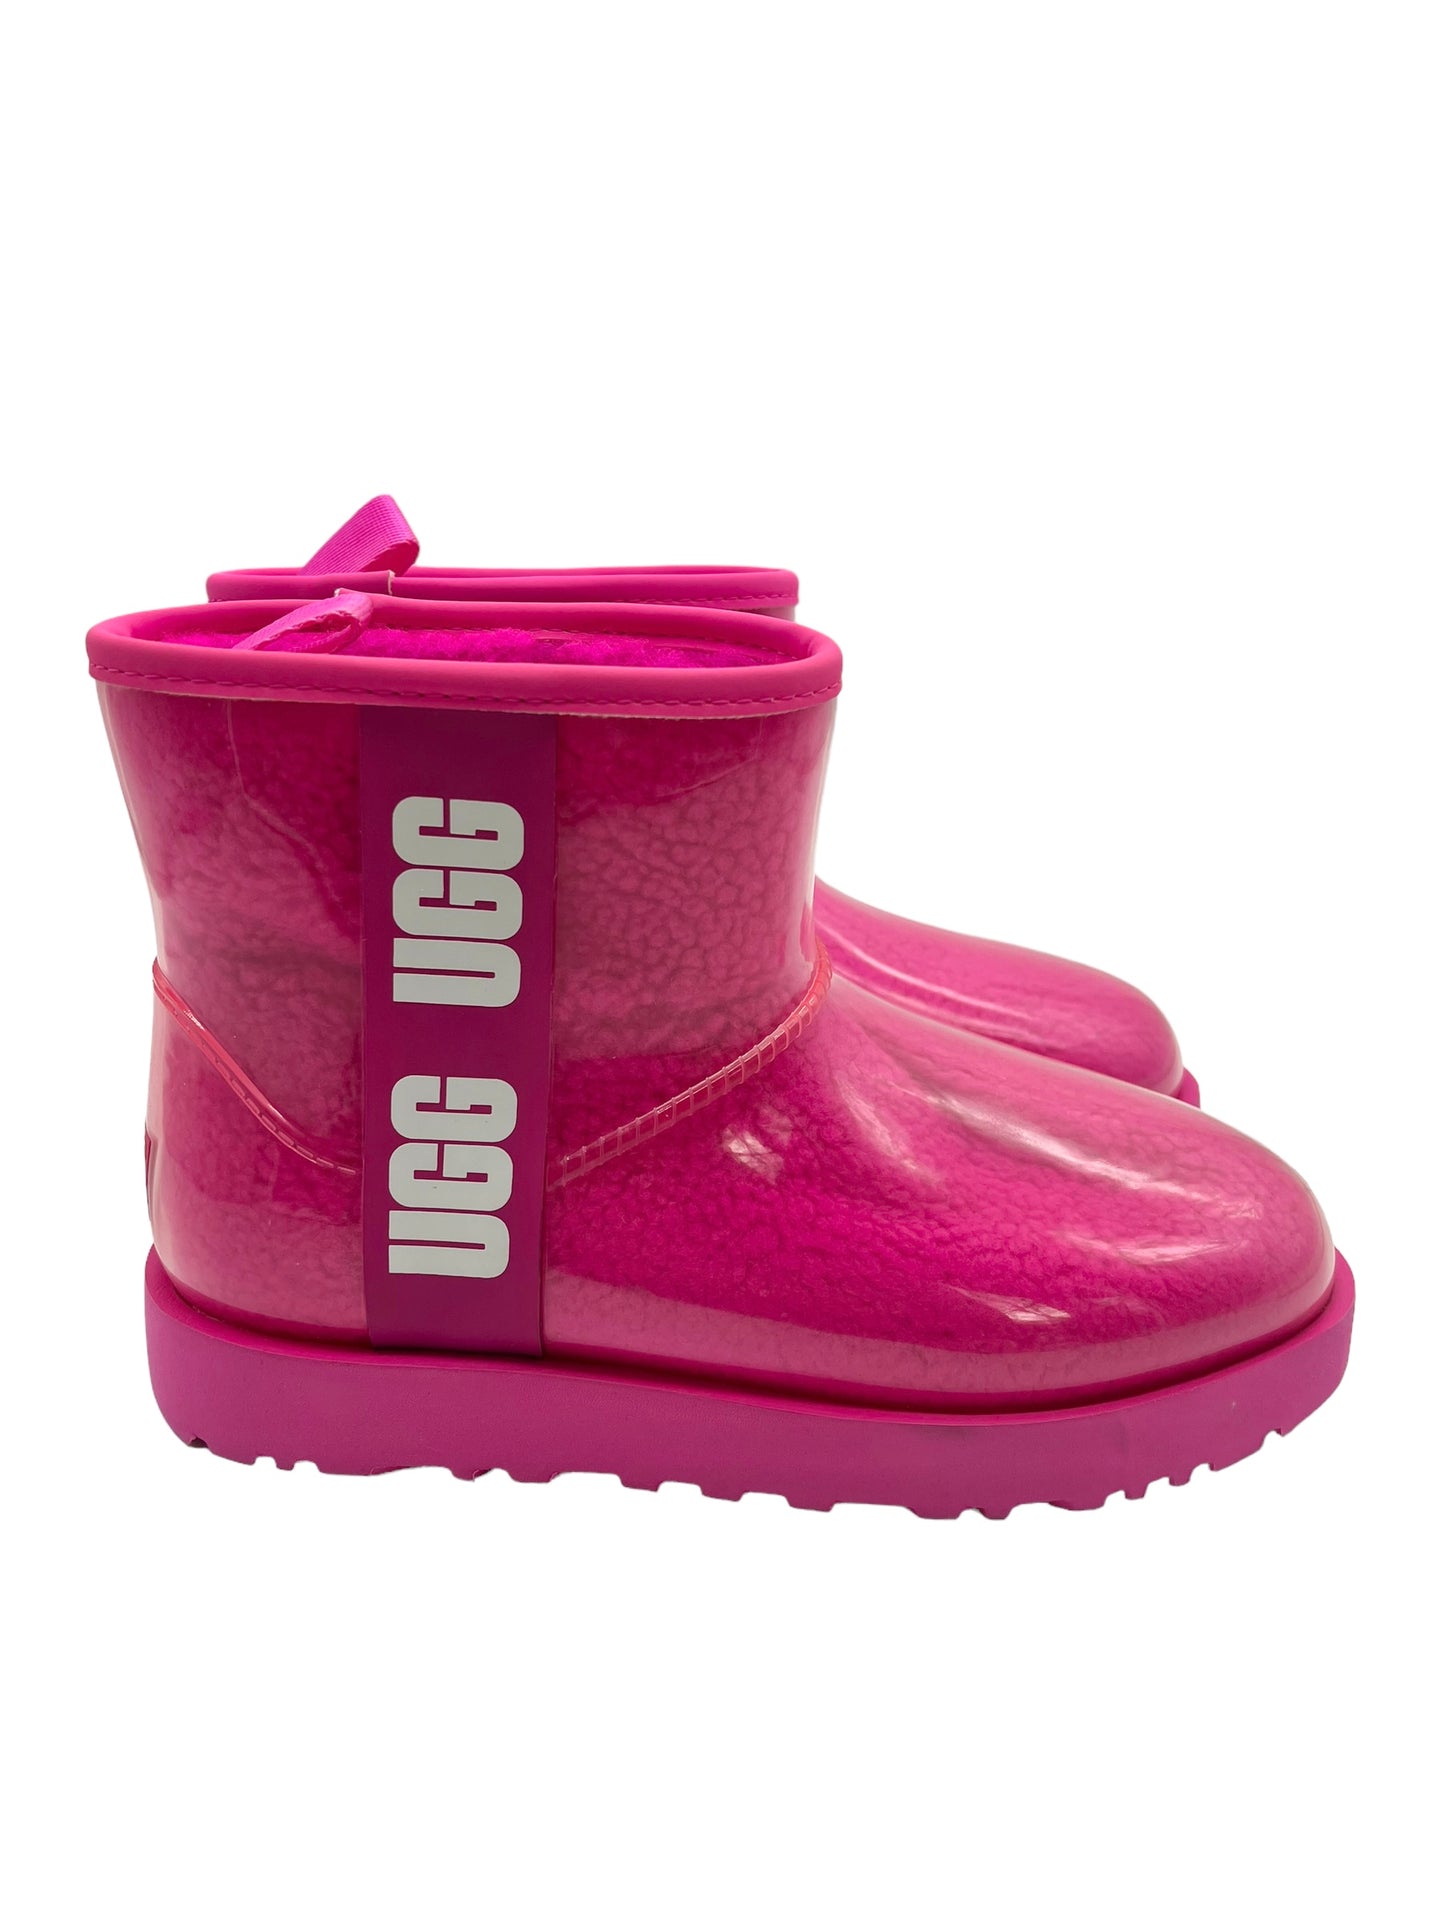 Ugg Classic Clear PVC Hibiscus Size 7 Mini Boots